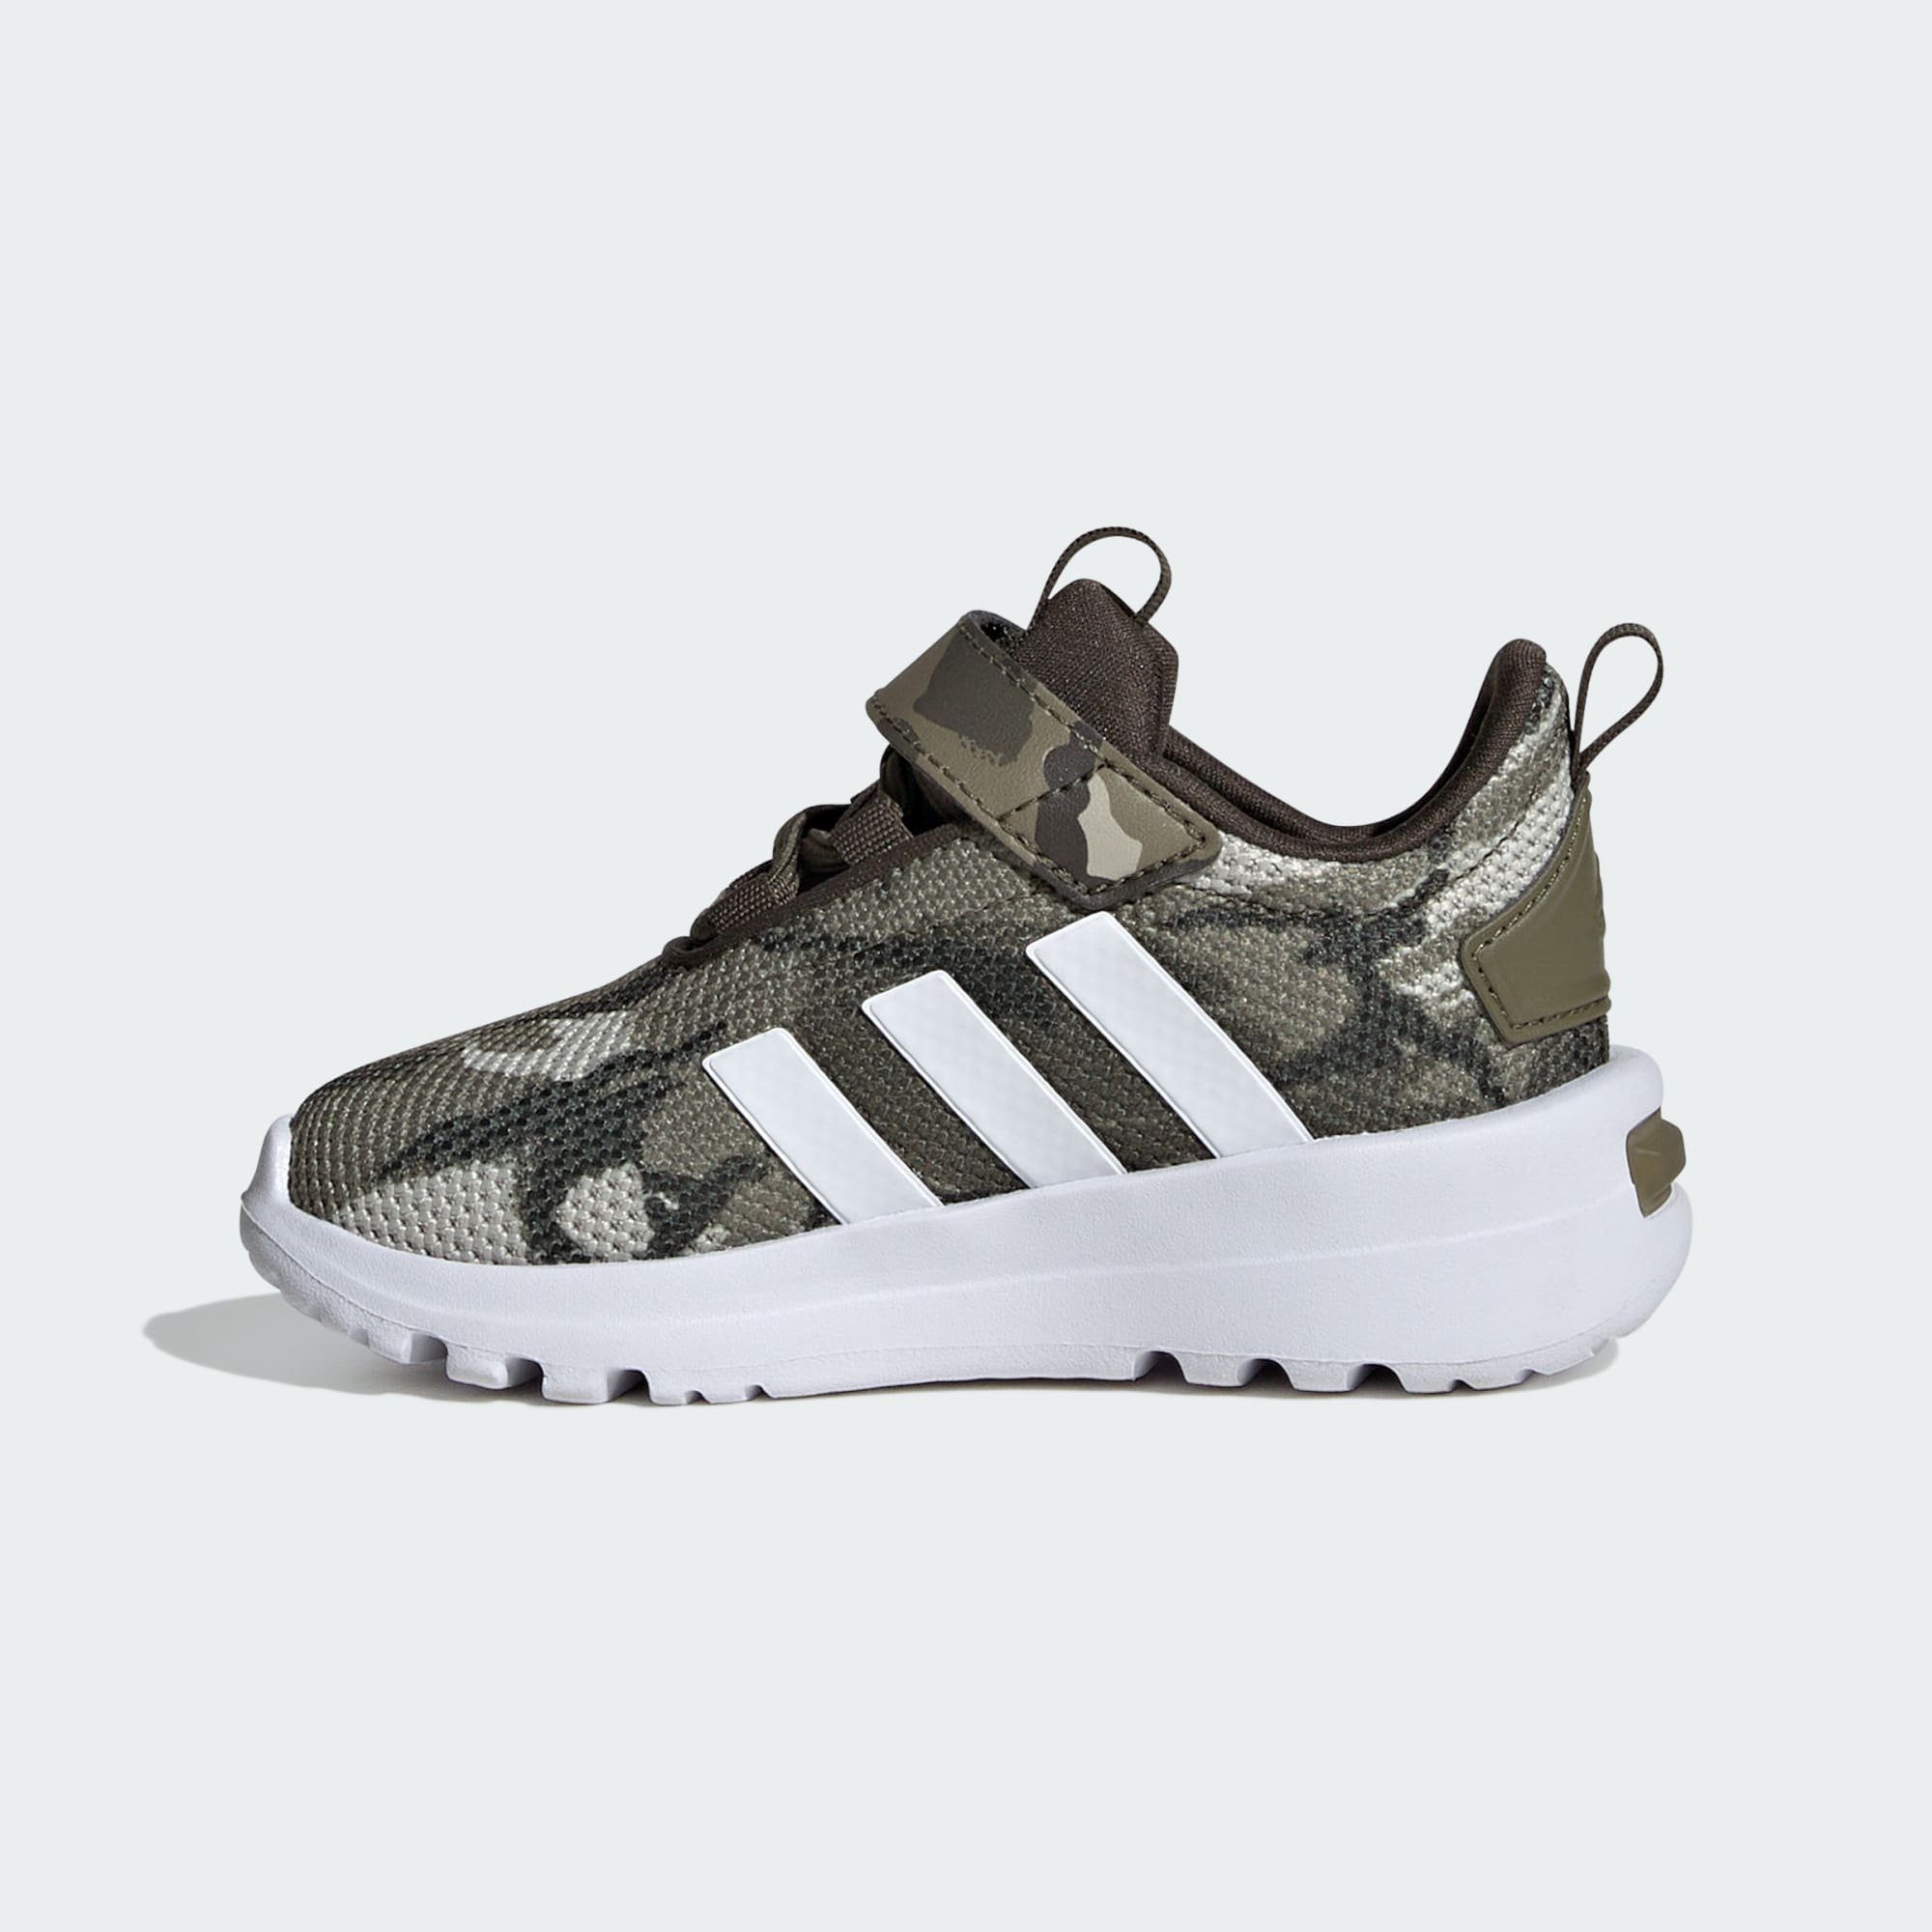 White Cloud Olive adidas Strata / / SCHUH KIDS RACER Olive Sportswear Sneaker TR23 Shadow